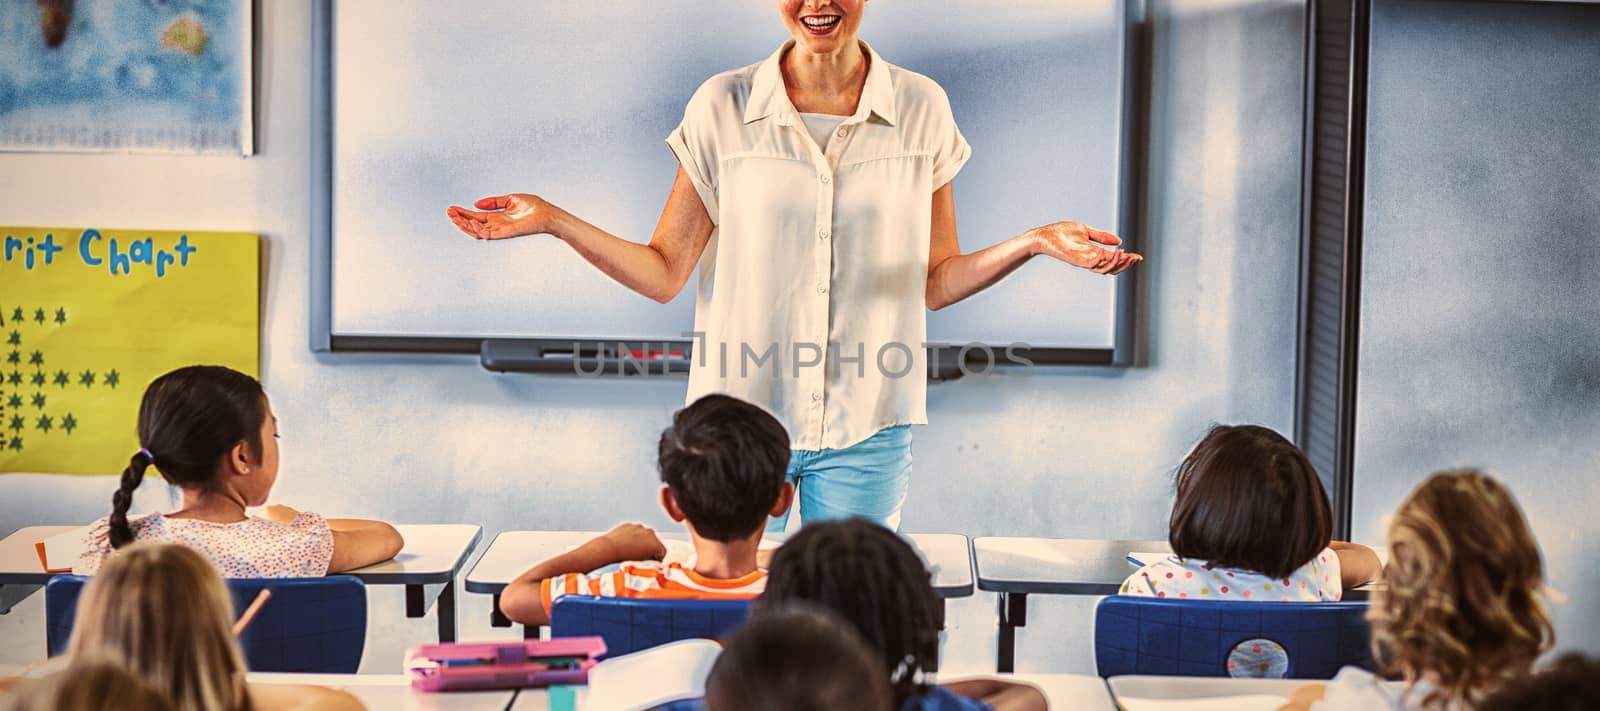 Portrait of smiling female teacher with arms outstretched in classroom